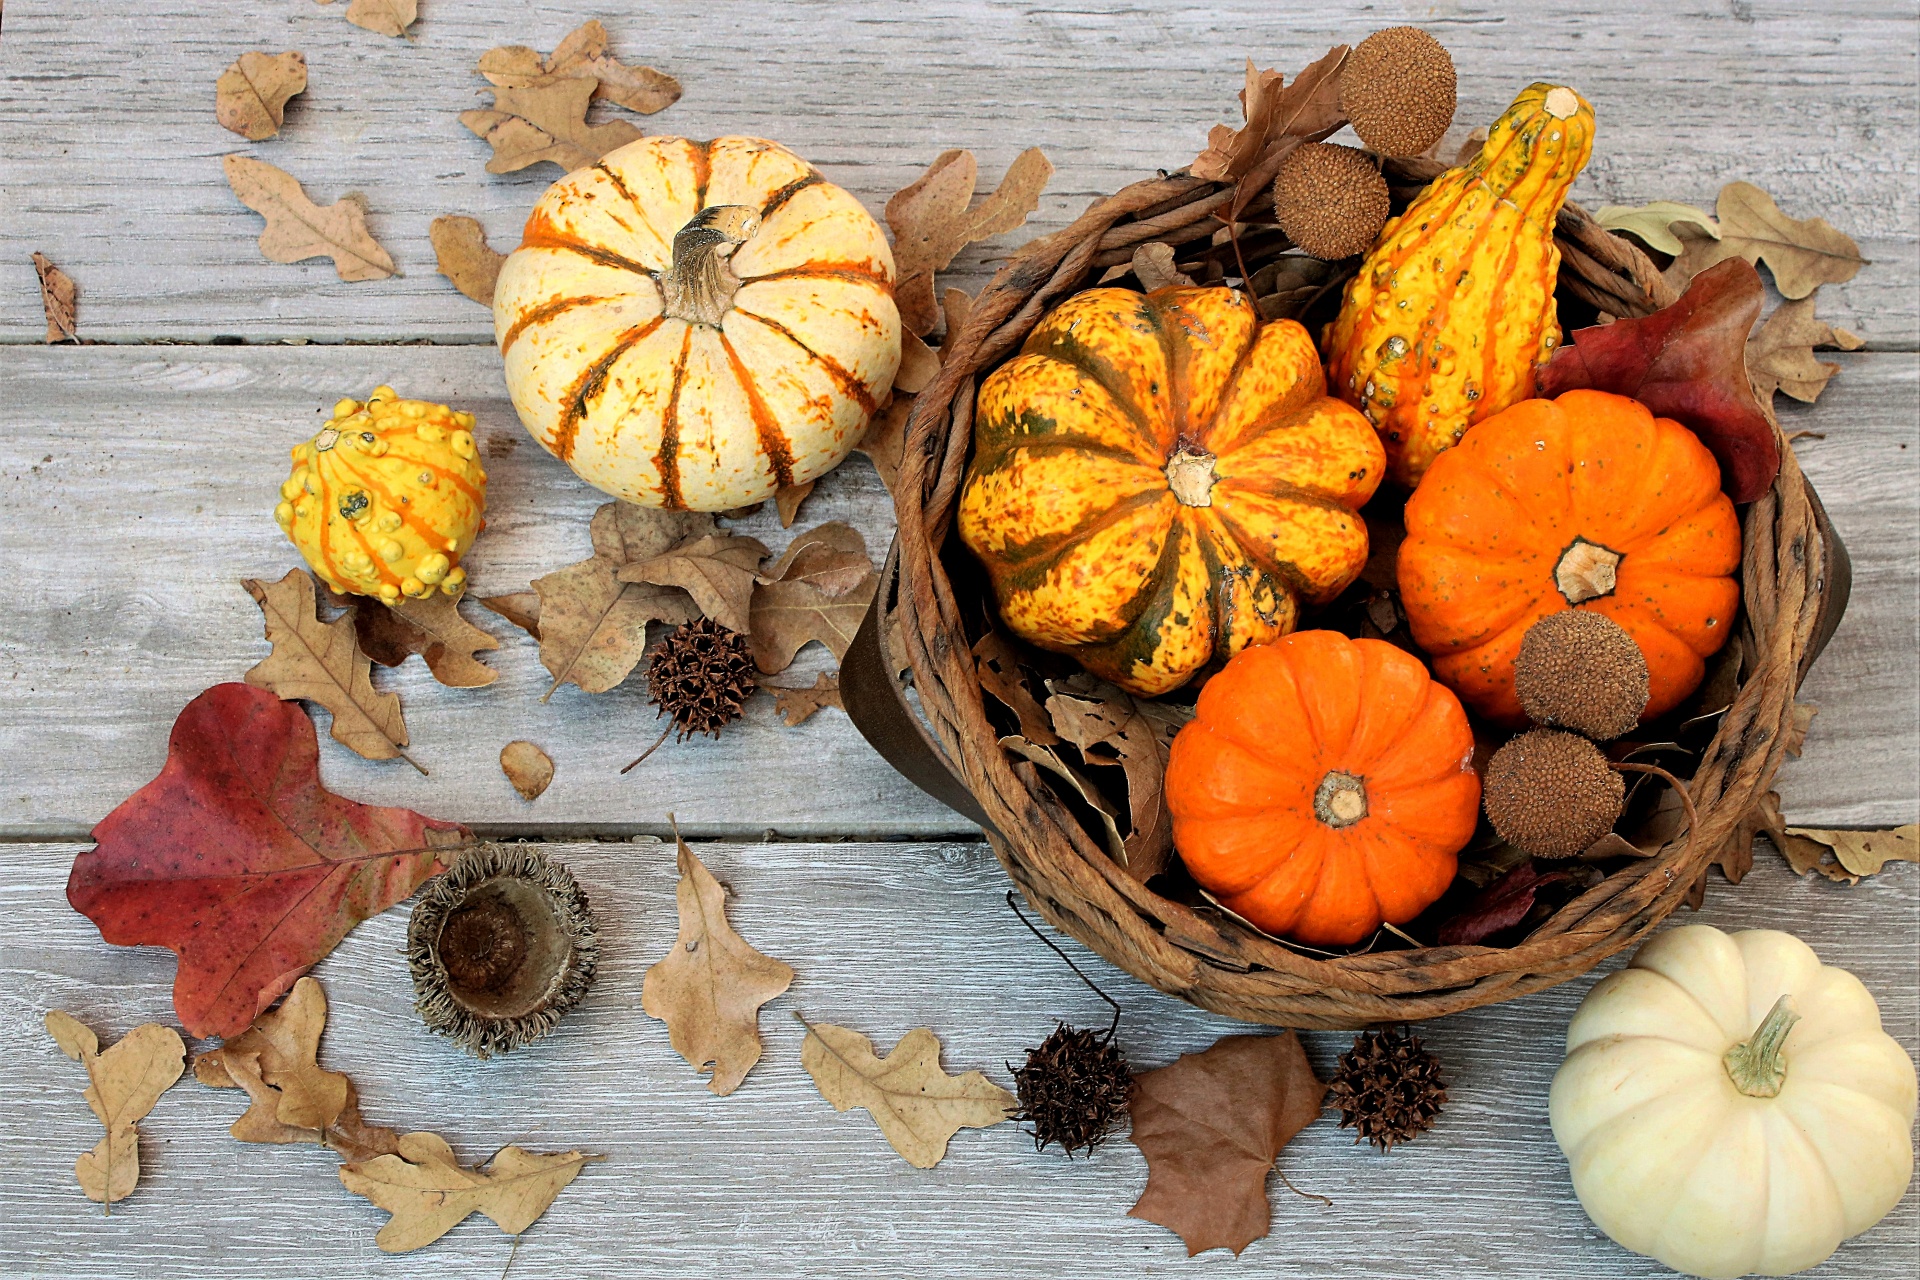 Fall Harvest 5 Free Stock Photo - Public Domain Pictures